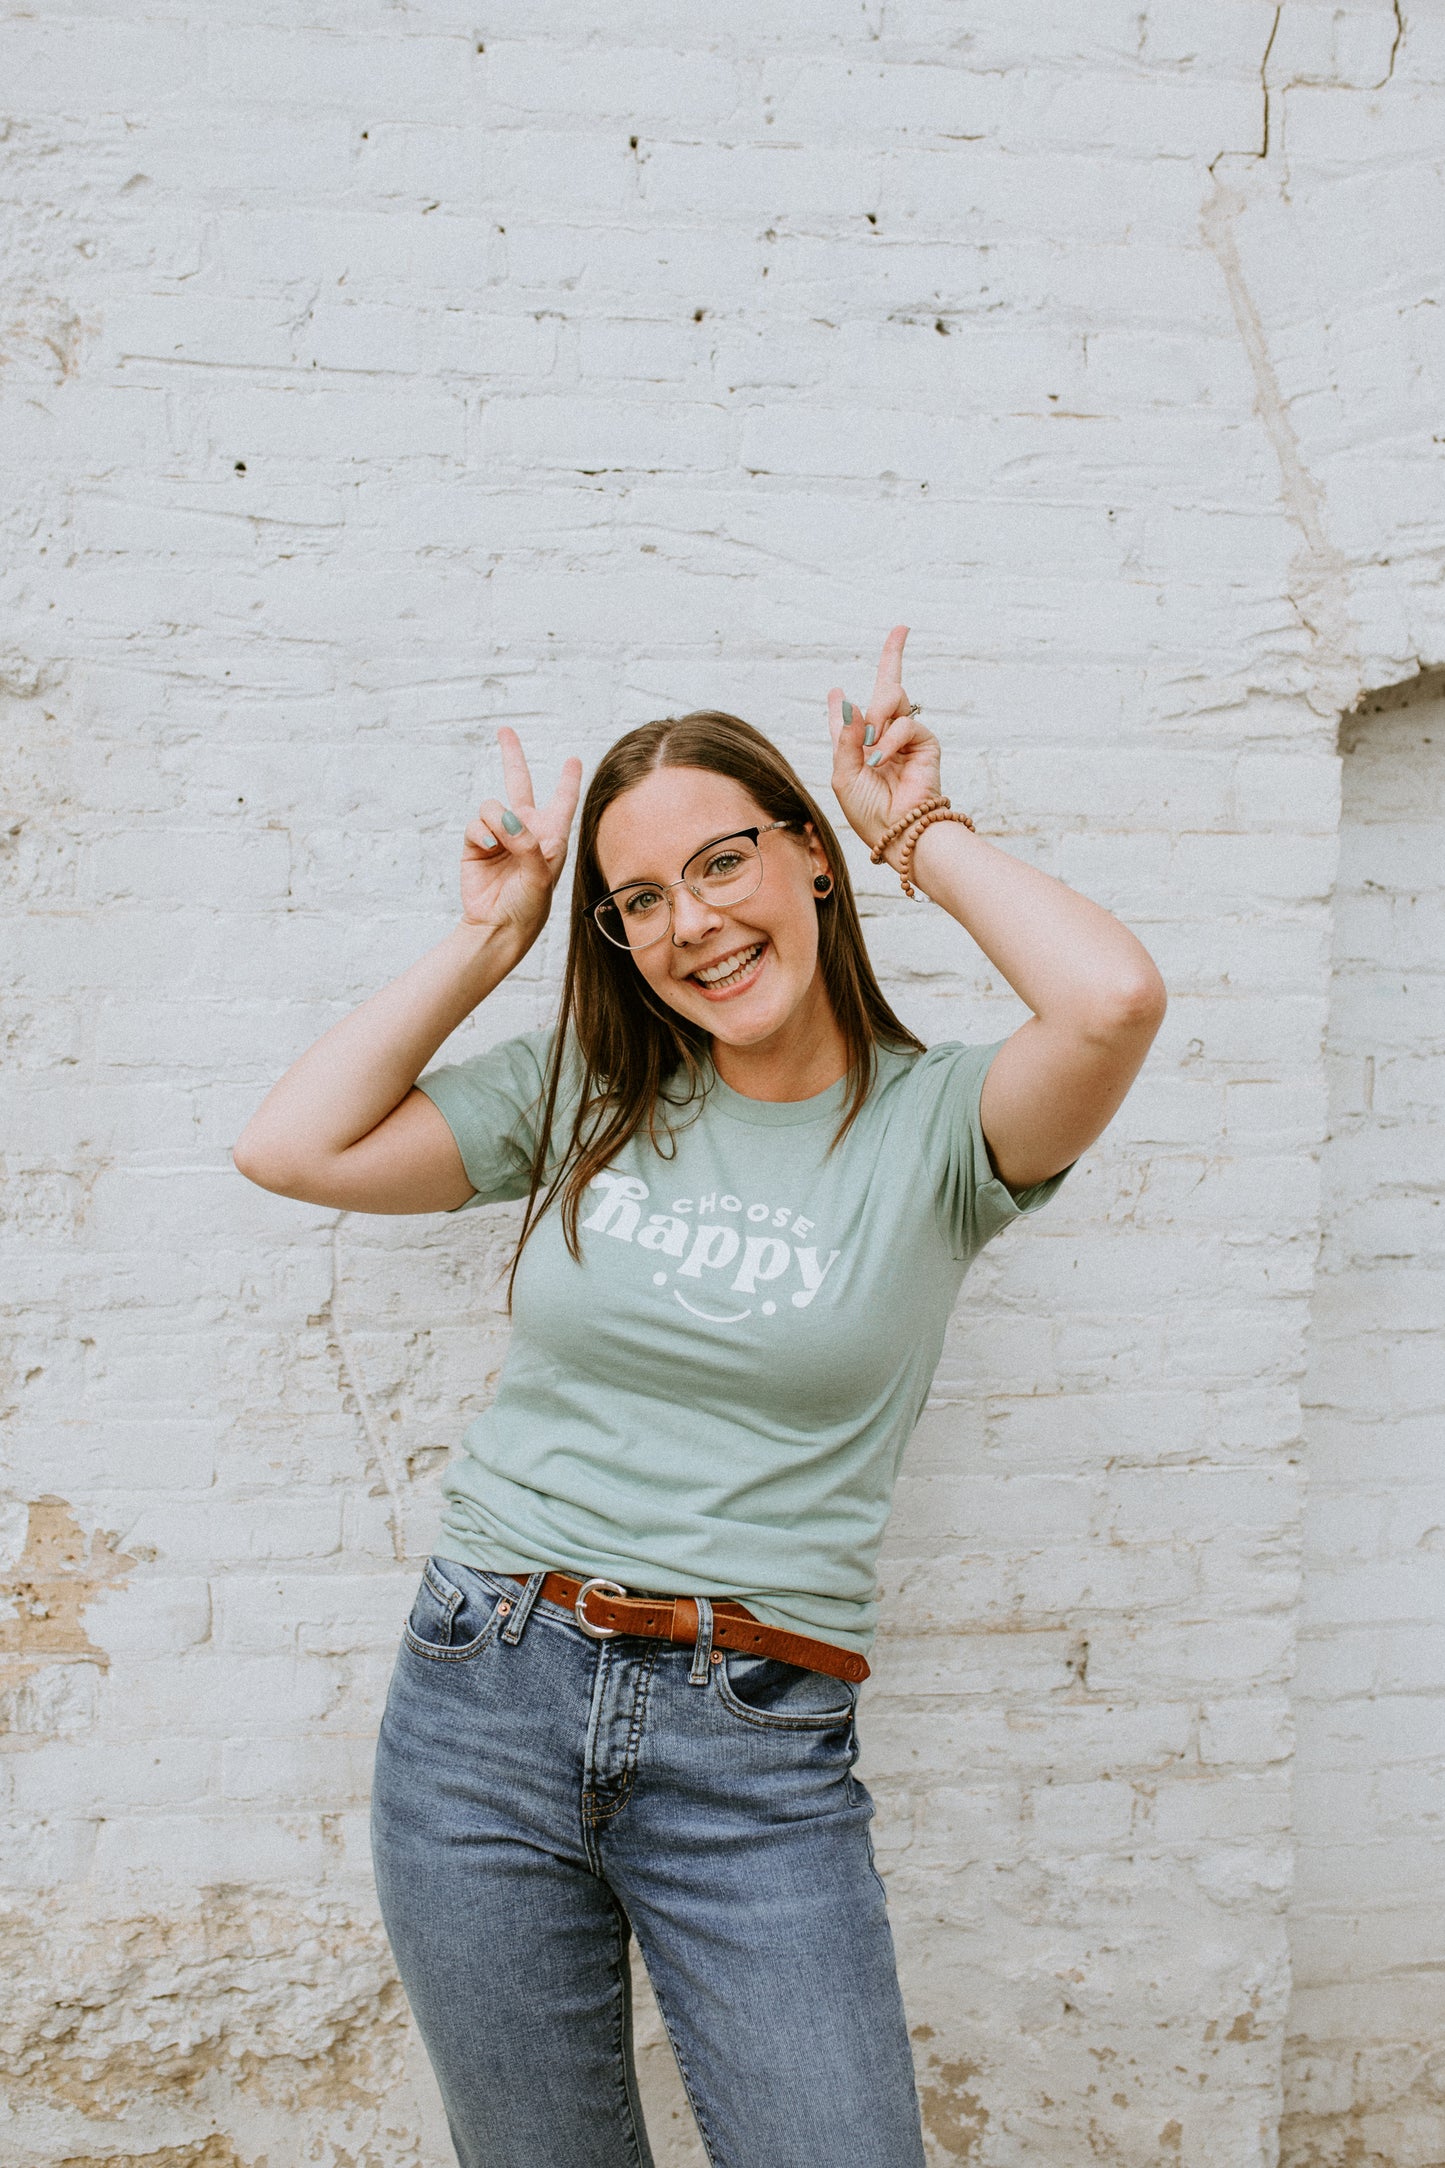 Choose Happy Tee - smiley graphic t-shirt